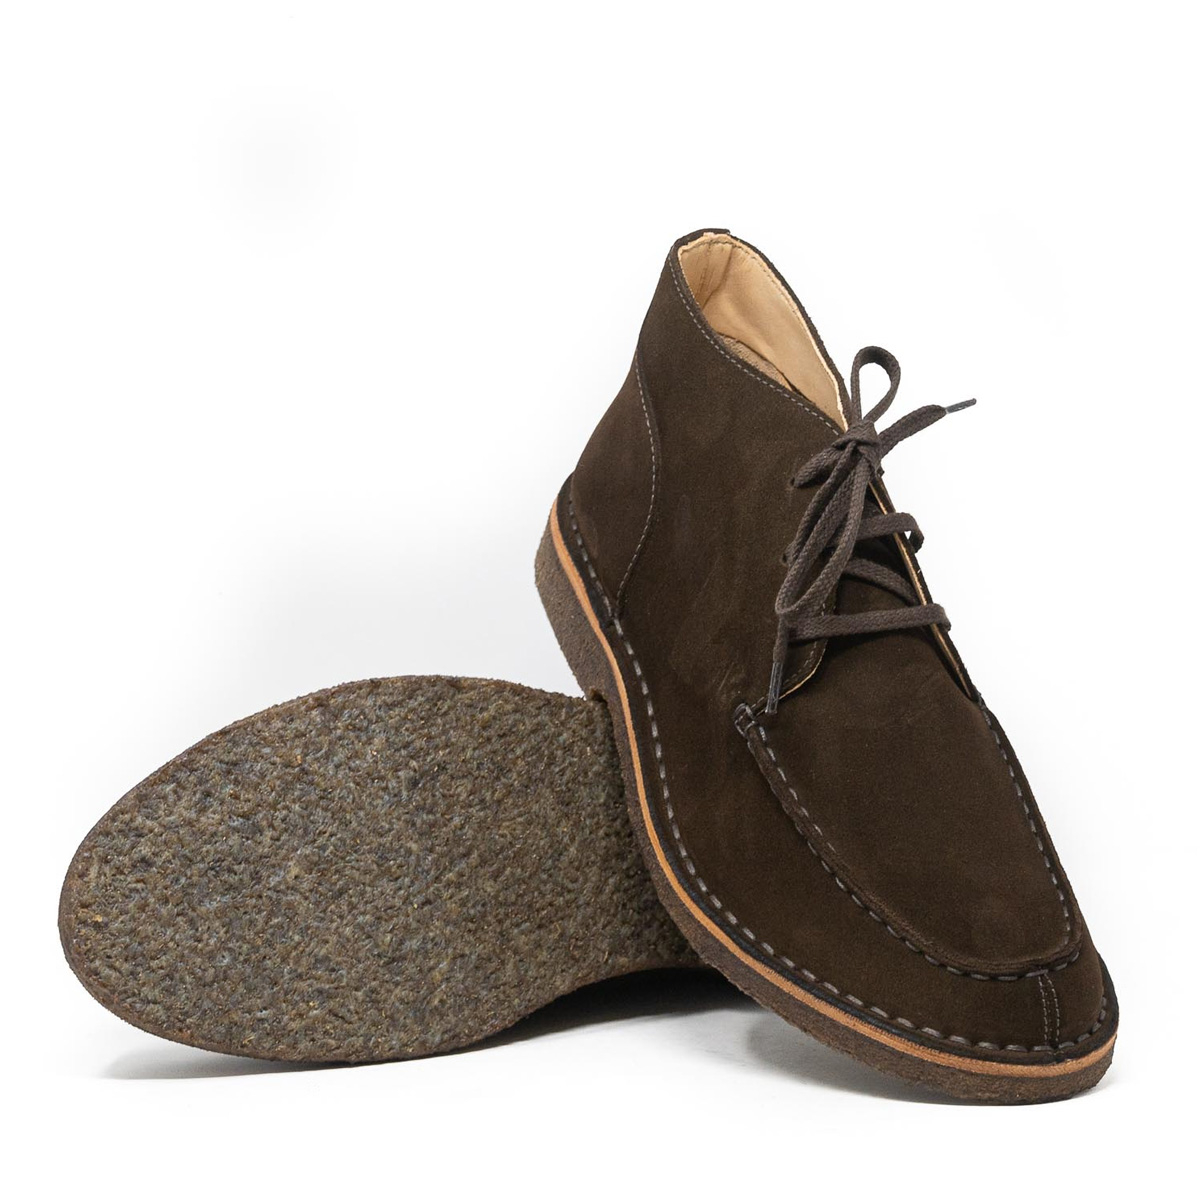 Astorflex Deukeflex Boot Dark Chestnut, a timeless classic and a must-have for modern shoe enthusiasts